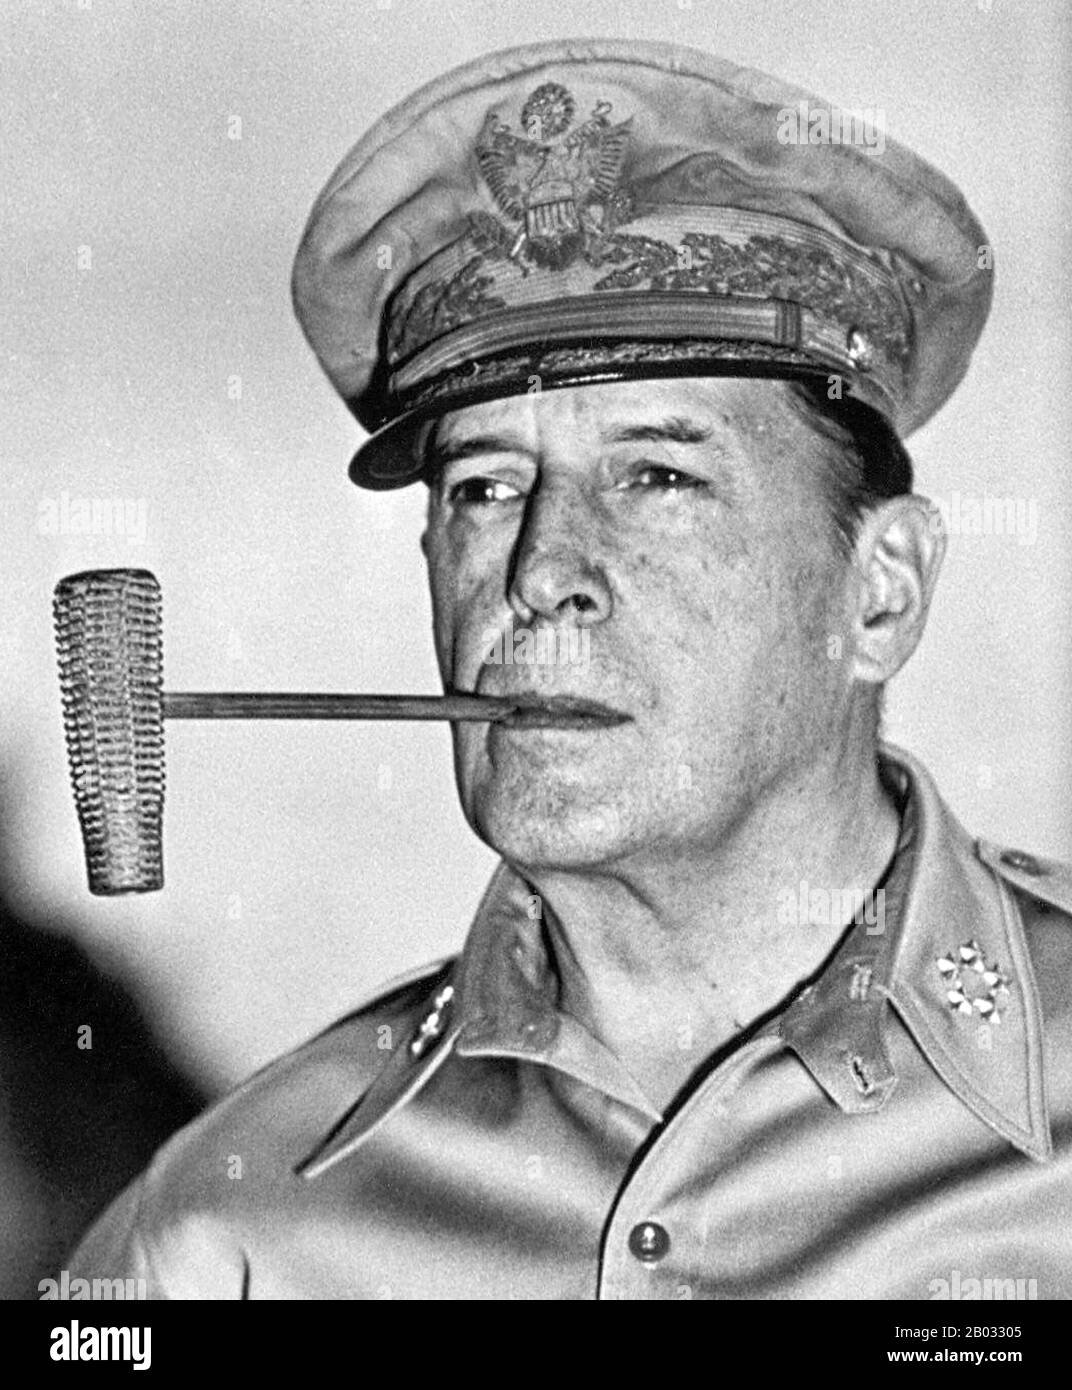 General of the Army Douglas MacArthur (January 26, 1880 – April 5, 1964) was an American general and field marshal of the Philippine Army. He was a Chief of Staff of the United States Army during the 1930s and played a prominent role in the Pacific theater during World War II.  He received the Medal of Honor for his service in the Philippines Campaign. Arthur MacArthur, Jr., and Douglas MacArthur were the first father and son to each be awarded the medal. He was one of only five men ever to rise to the rank of general of the army in the U.S. Army, and the only man ever to become a field marsha Stock Photo